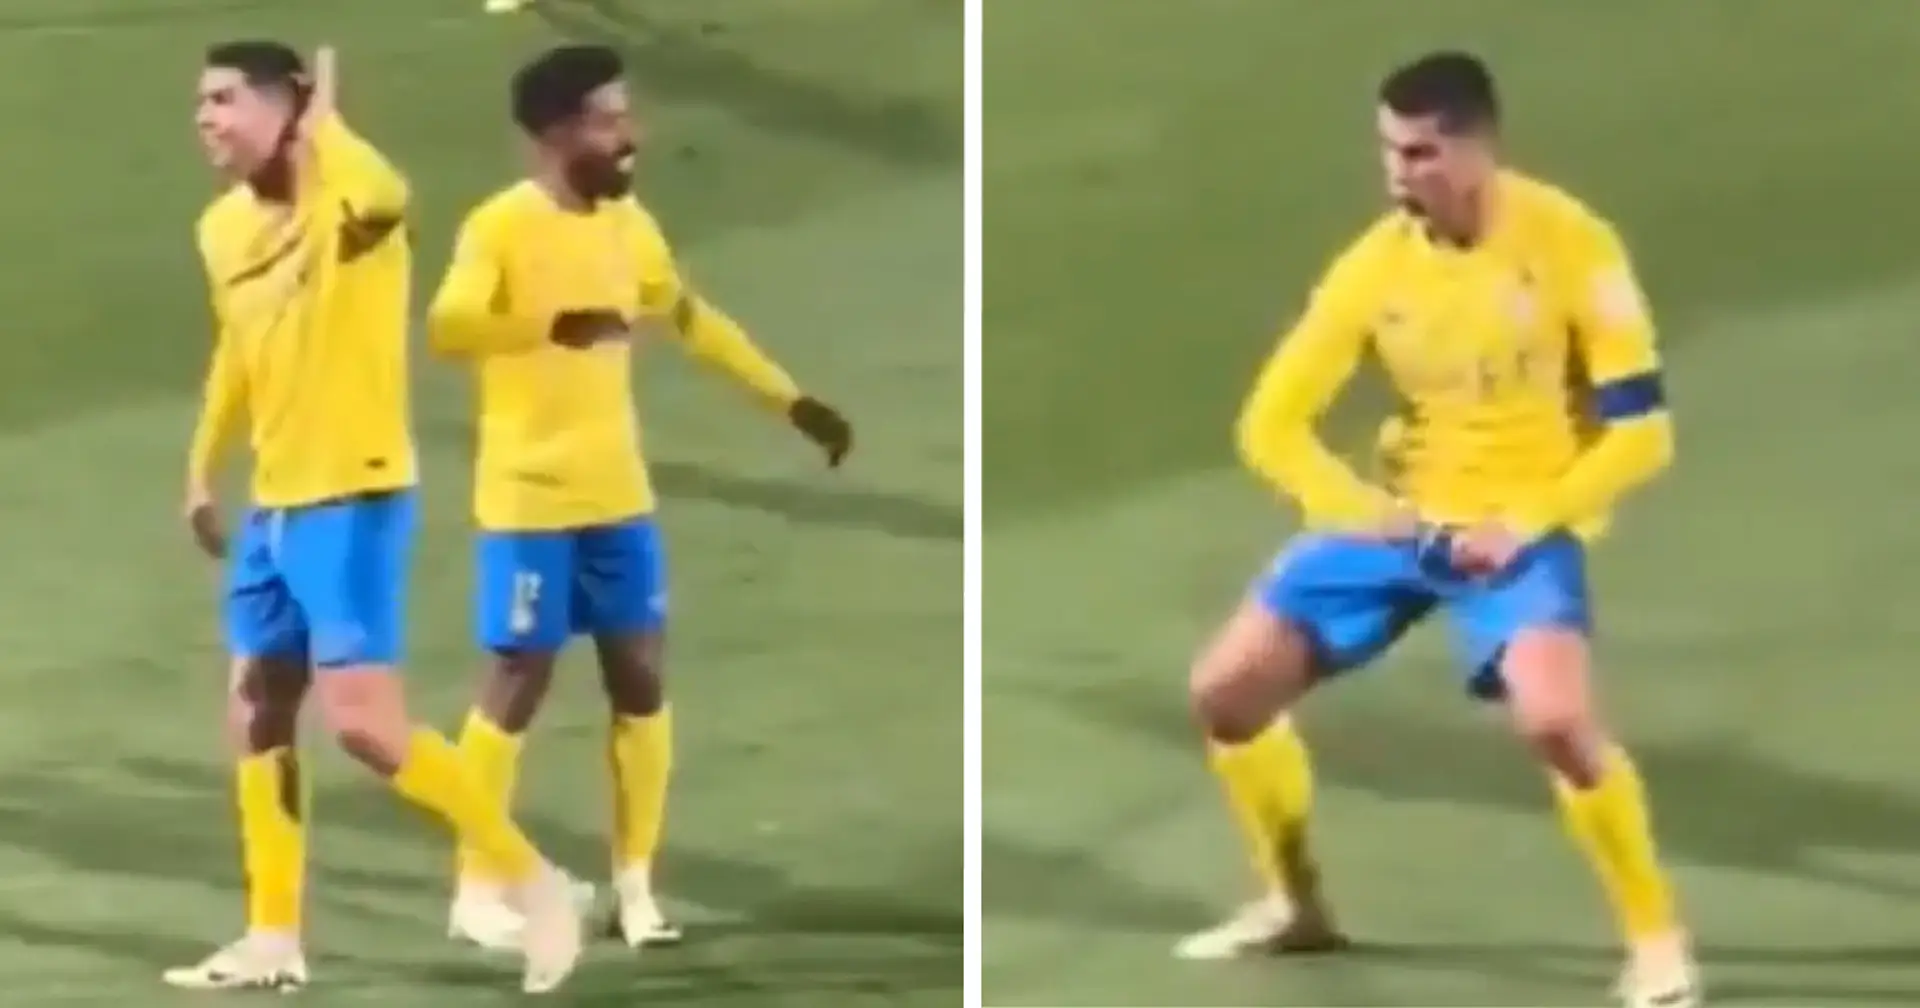 Ronaldo provoked into making despicable d*** gesture as Saudi fans chants 'Messi', investigation to follow